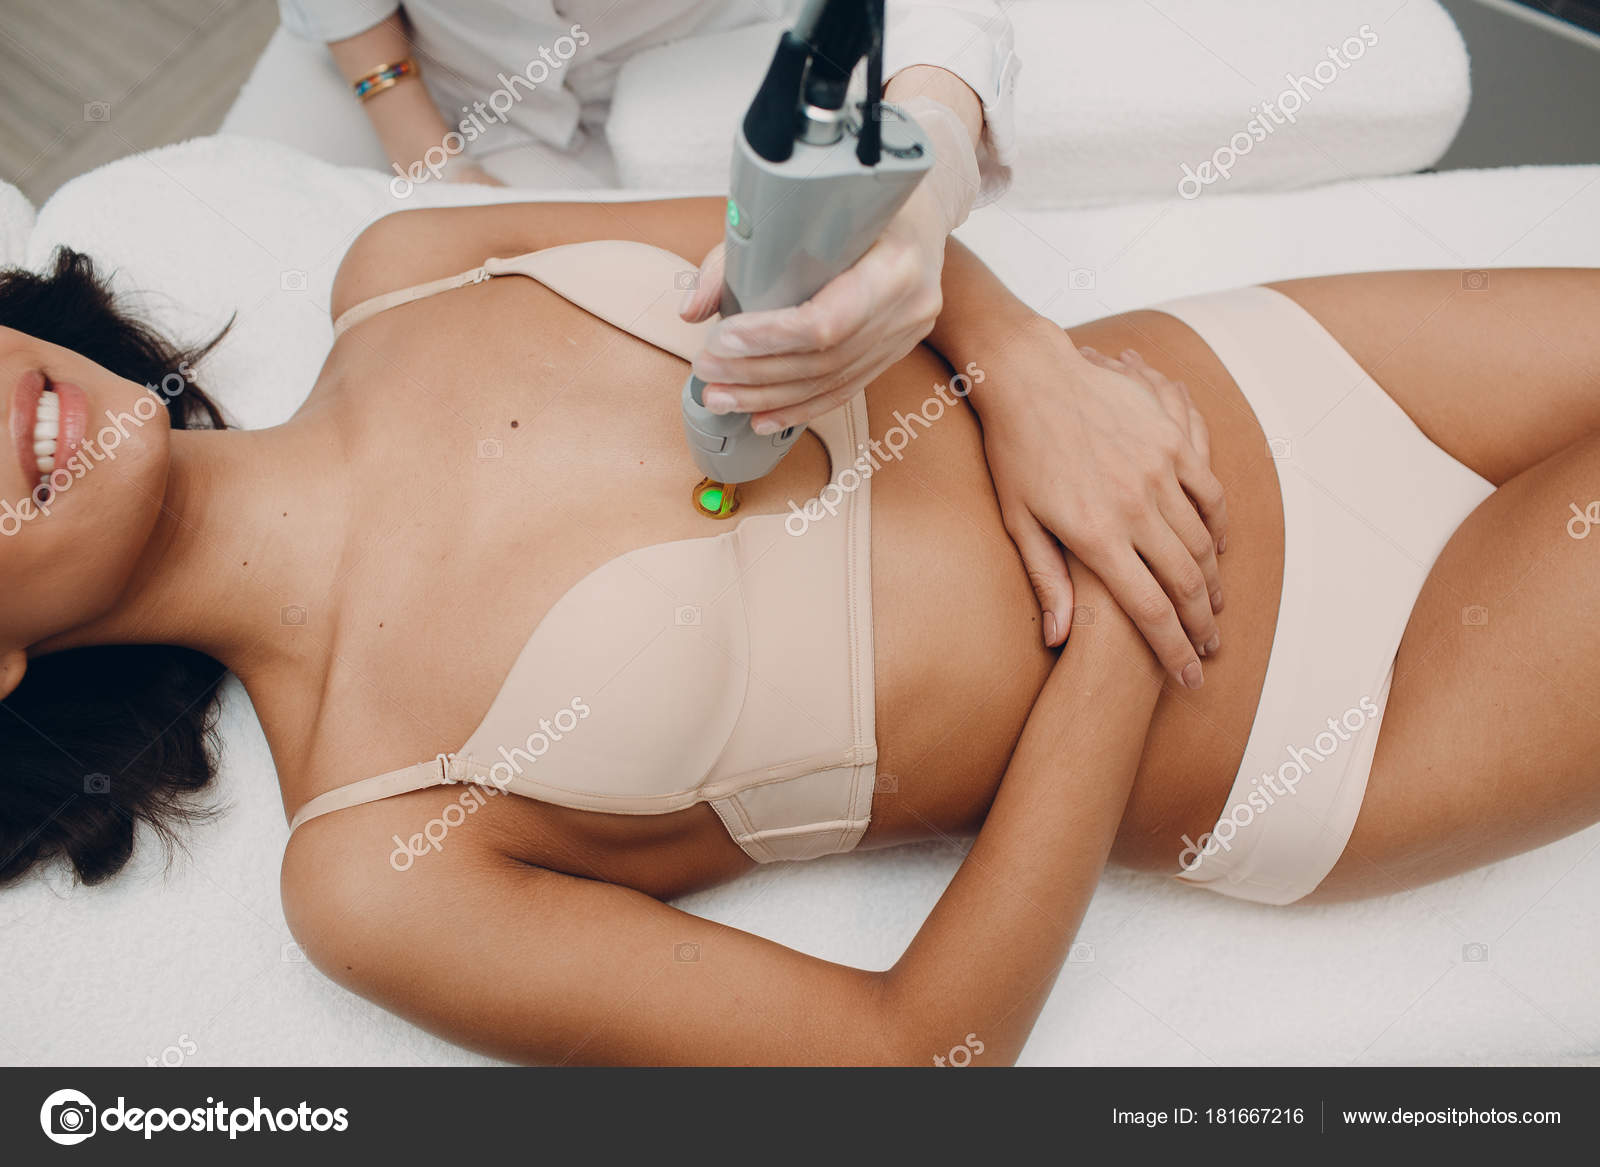 Breast Laser Epilation Cosmetology Hair Removal Cosmetology Procedure Laser  Epilation Stock Photo by © 181667216